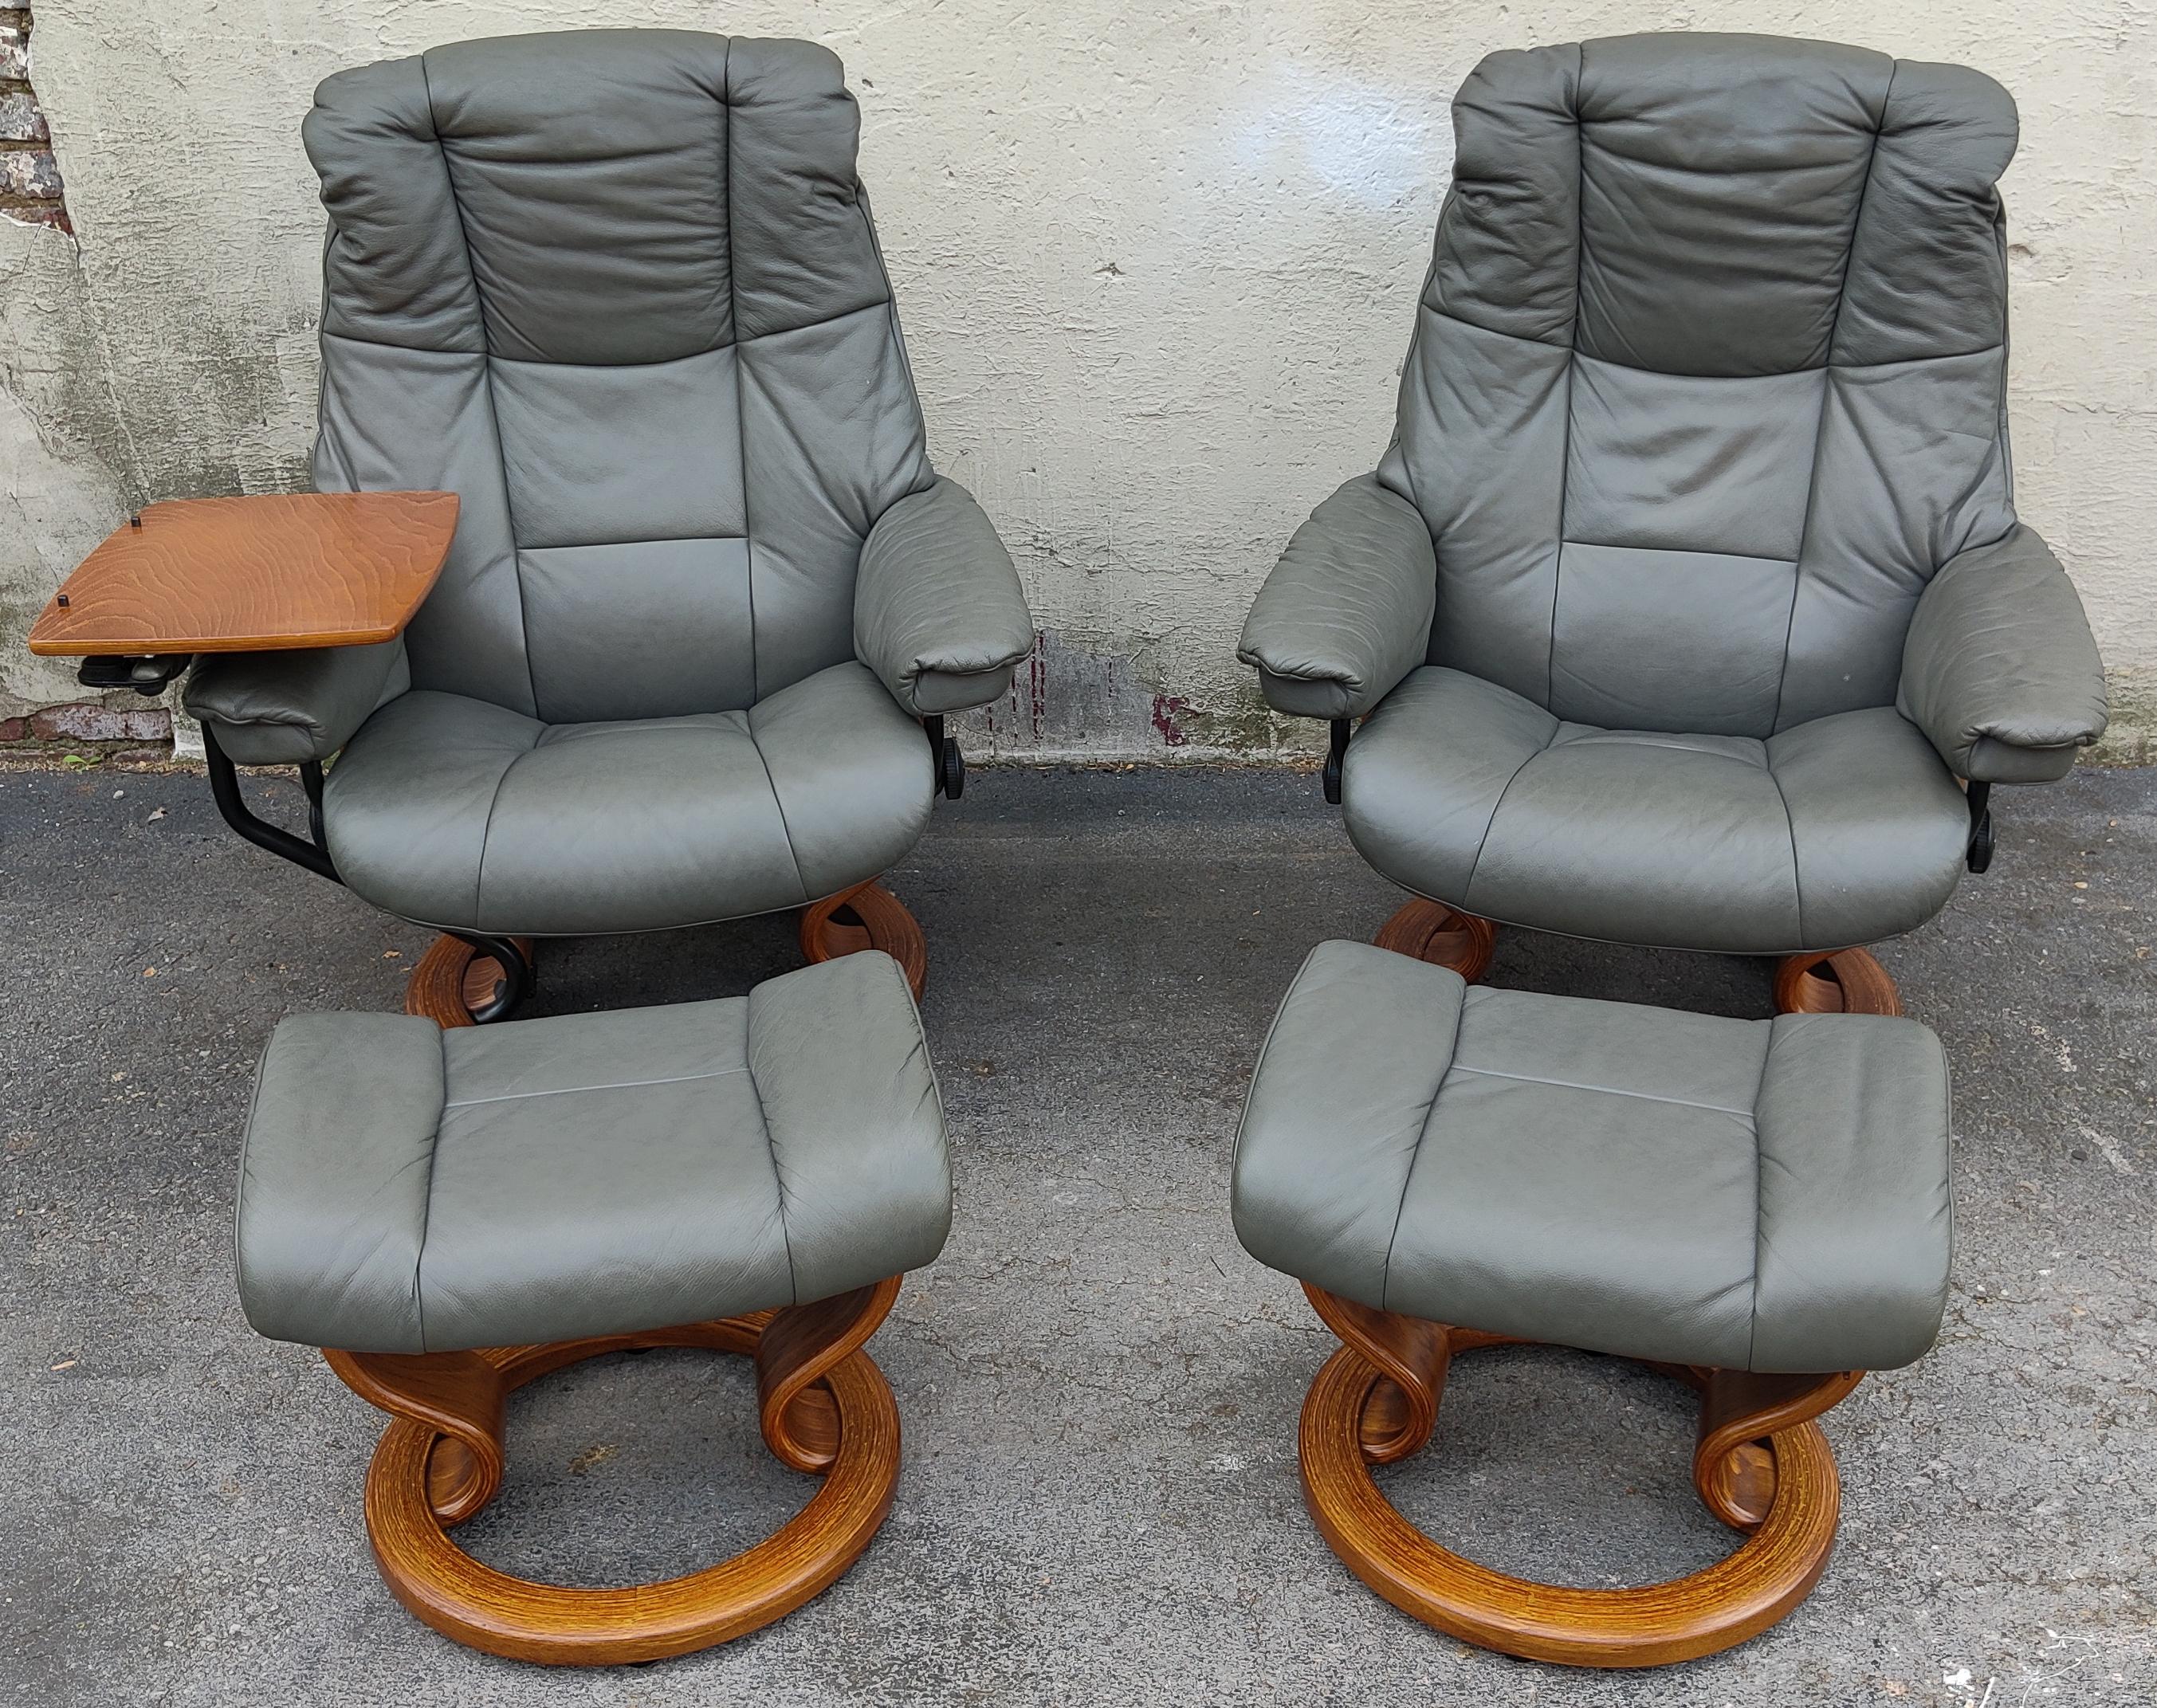 A Scandinavian style pair of recliners and ottomans by Ekornes, their Stressless brand. With teak wood and metal frames and genuine leather upholstery, these comfortable slate colored leather recliners swivel 360 degrees and feature robust lean